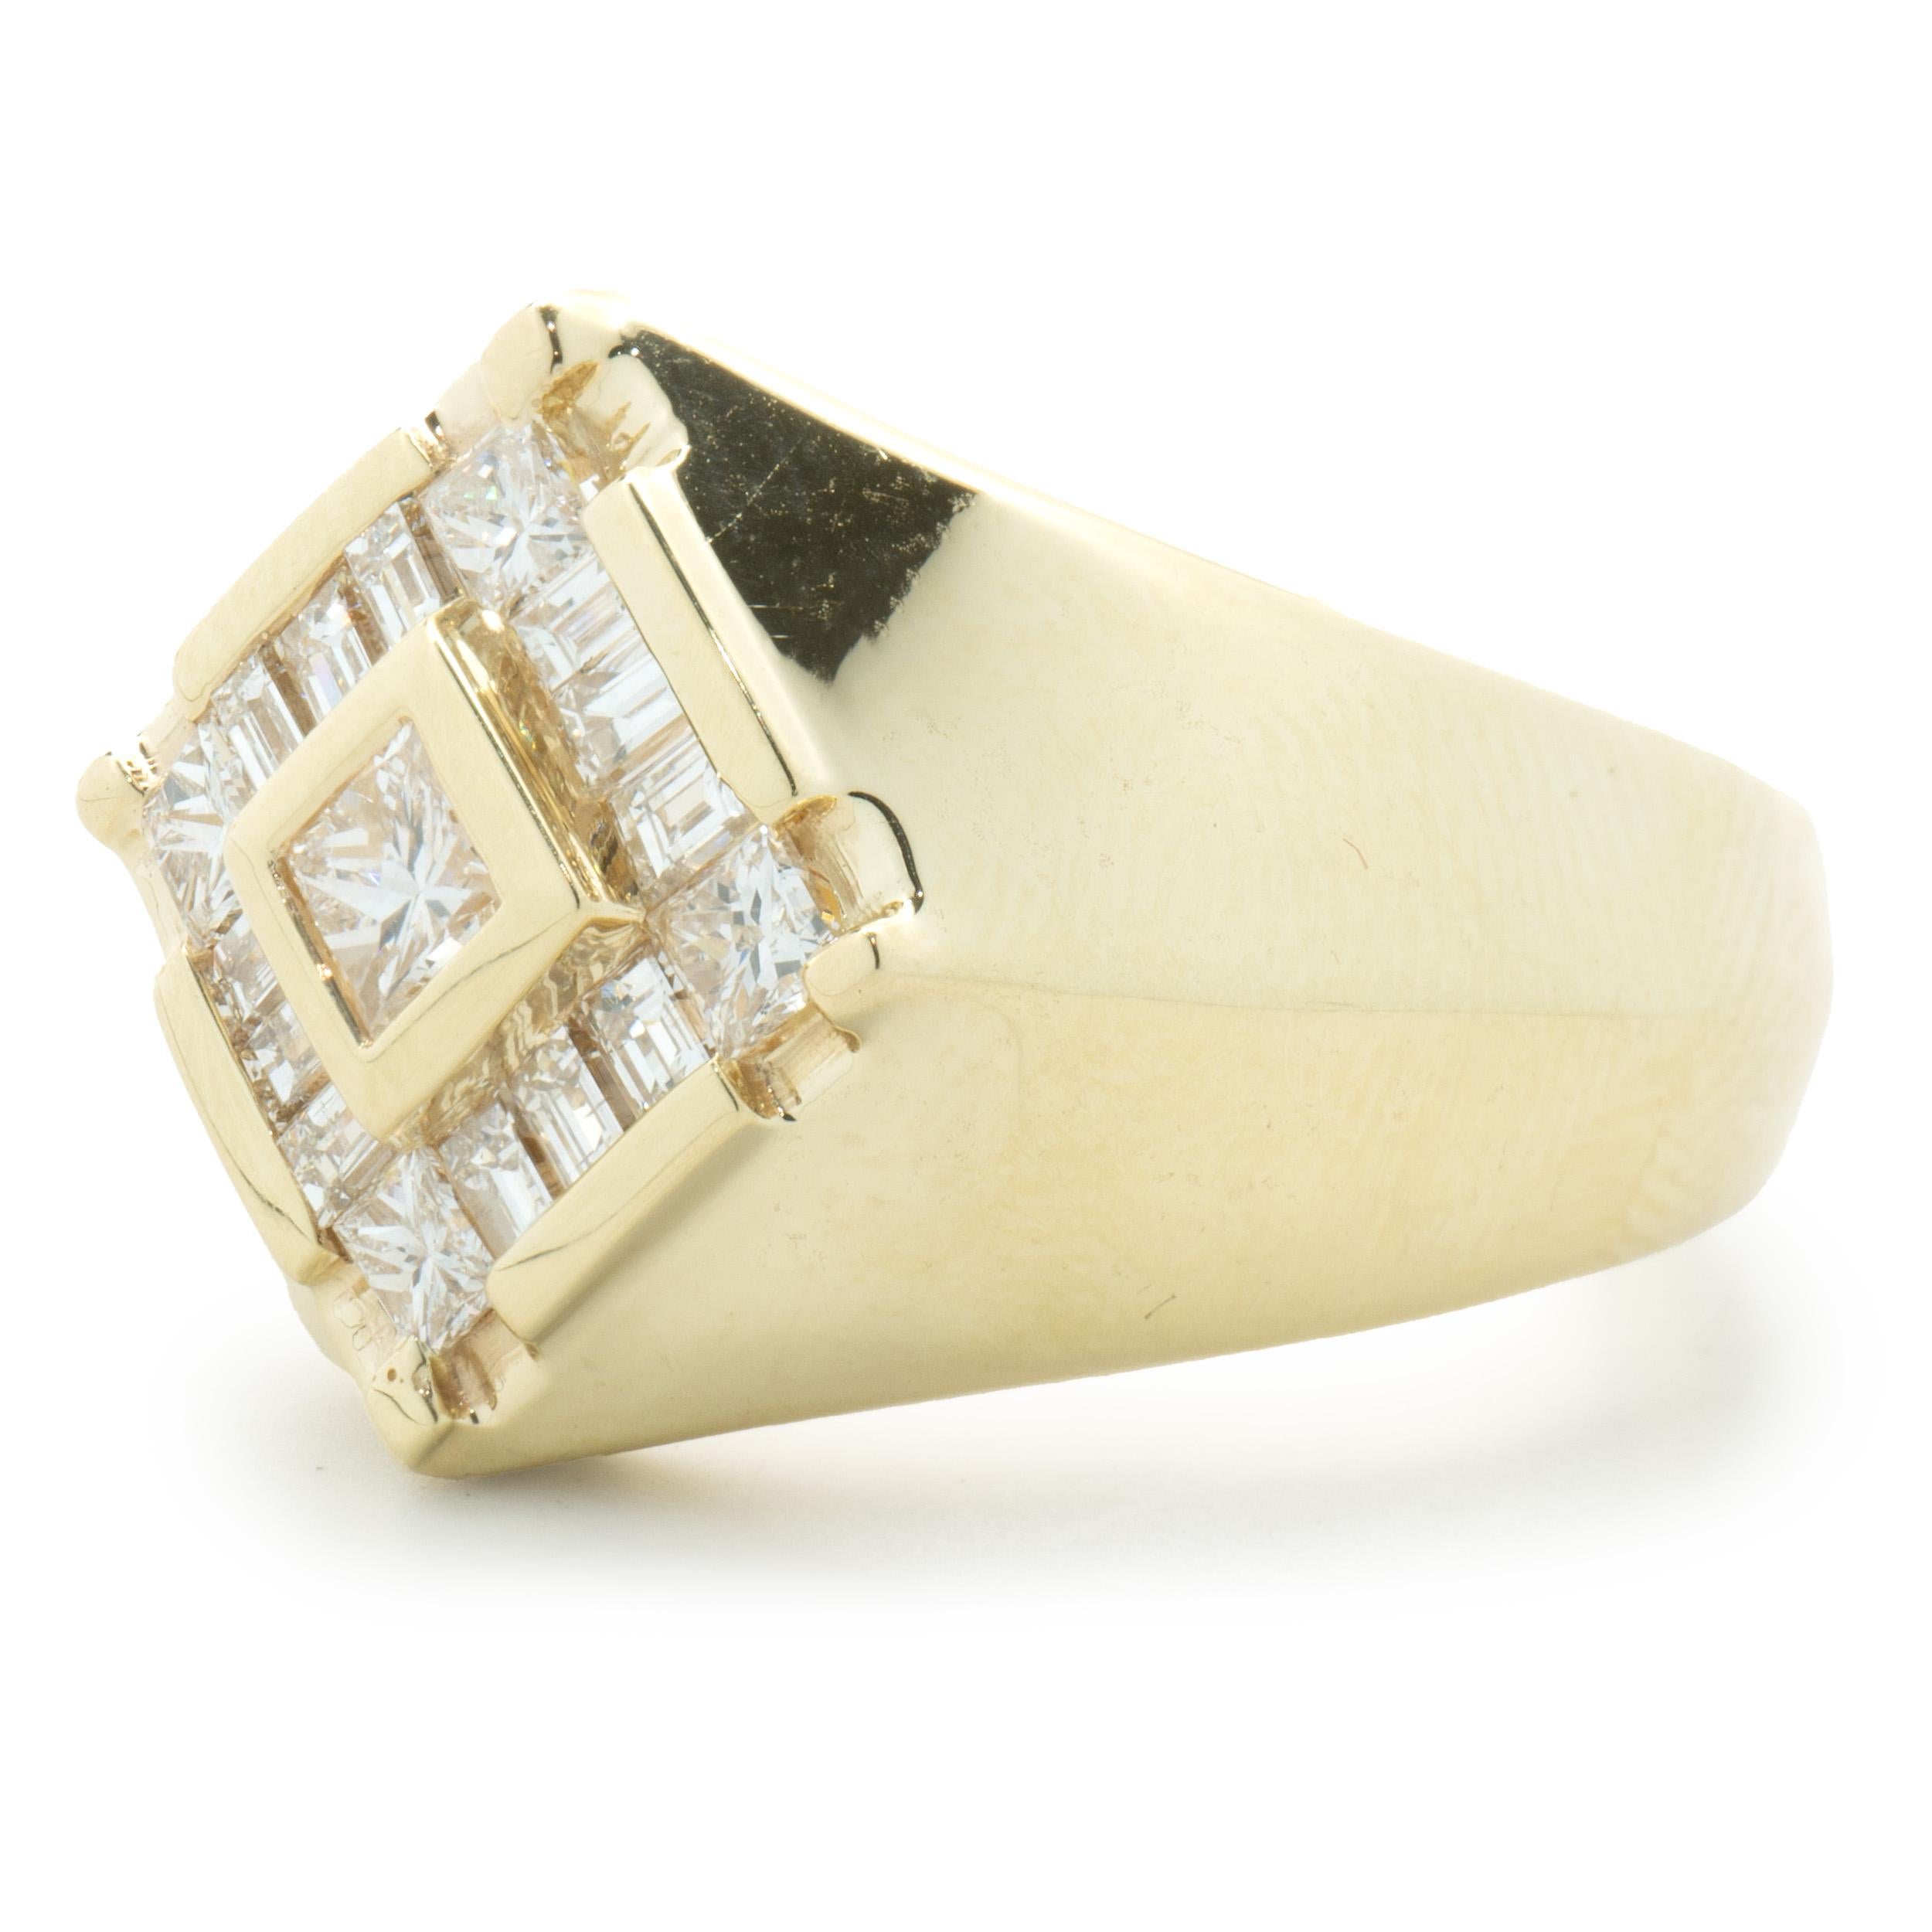 Designer: custom
Material: 14K yellow gold
Diamond: 17 princess & baguette = 1.38cttw
Color: G
Clarity: VS1-2
Size: 10 sizing available 
Weight: 13.97 grams